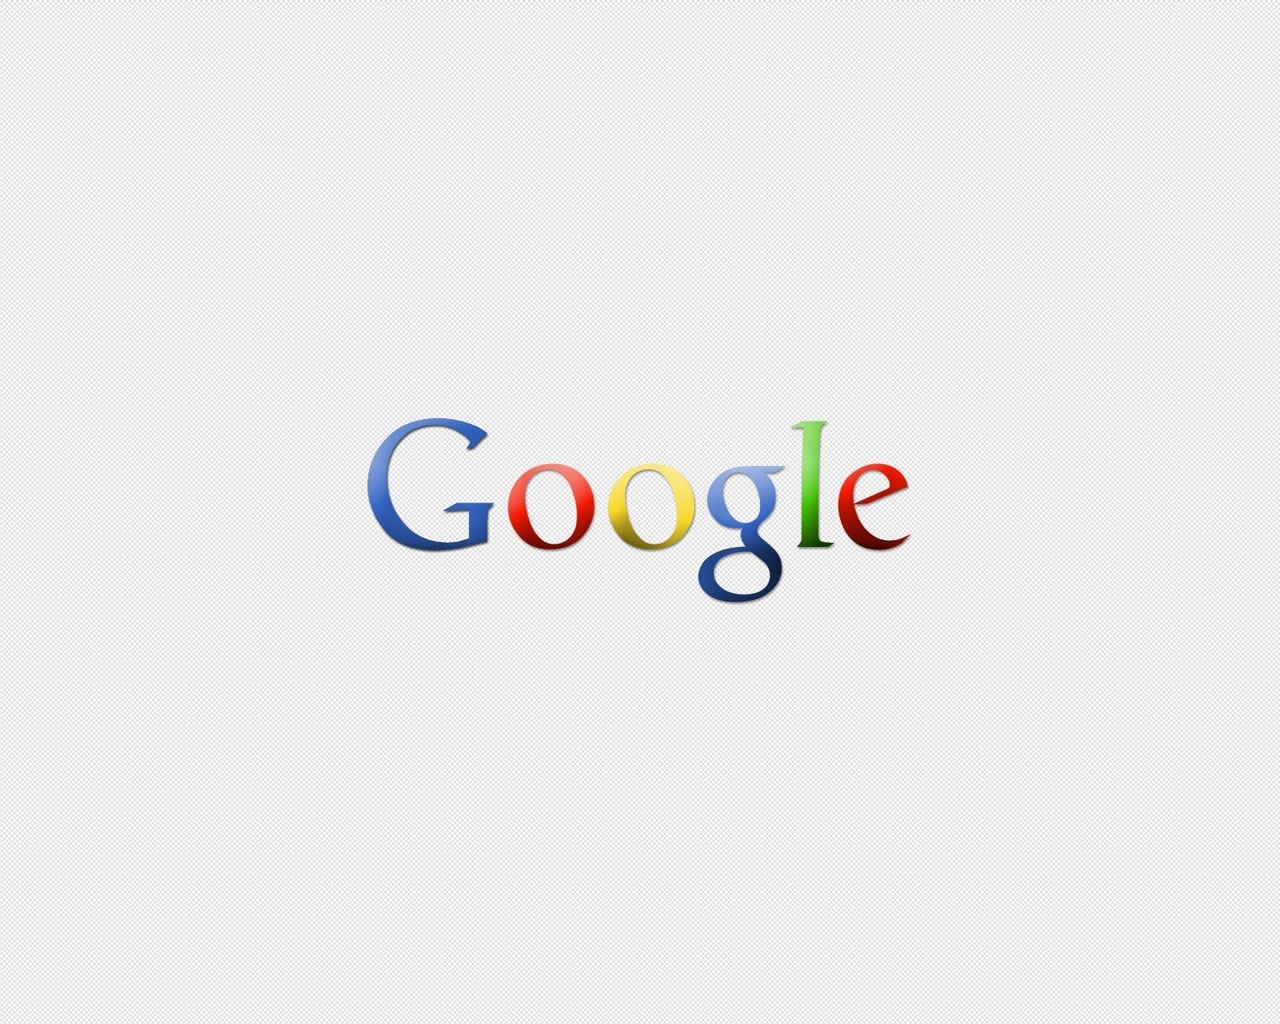 Google for 1280 x 1024 resolution